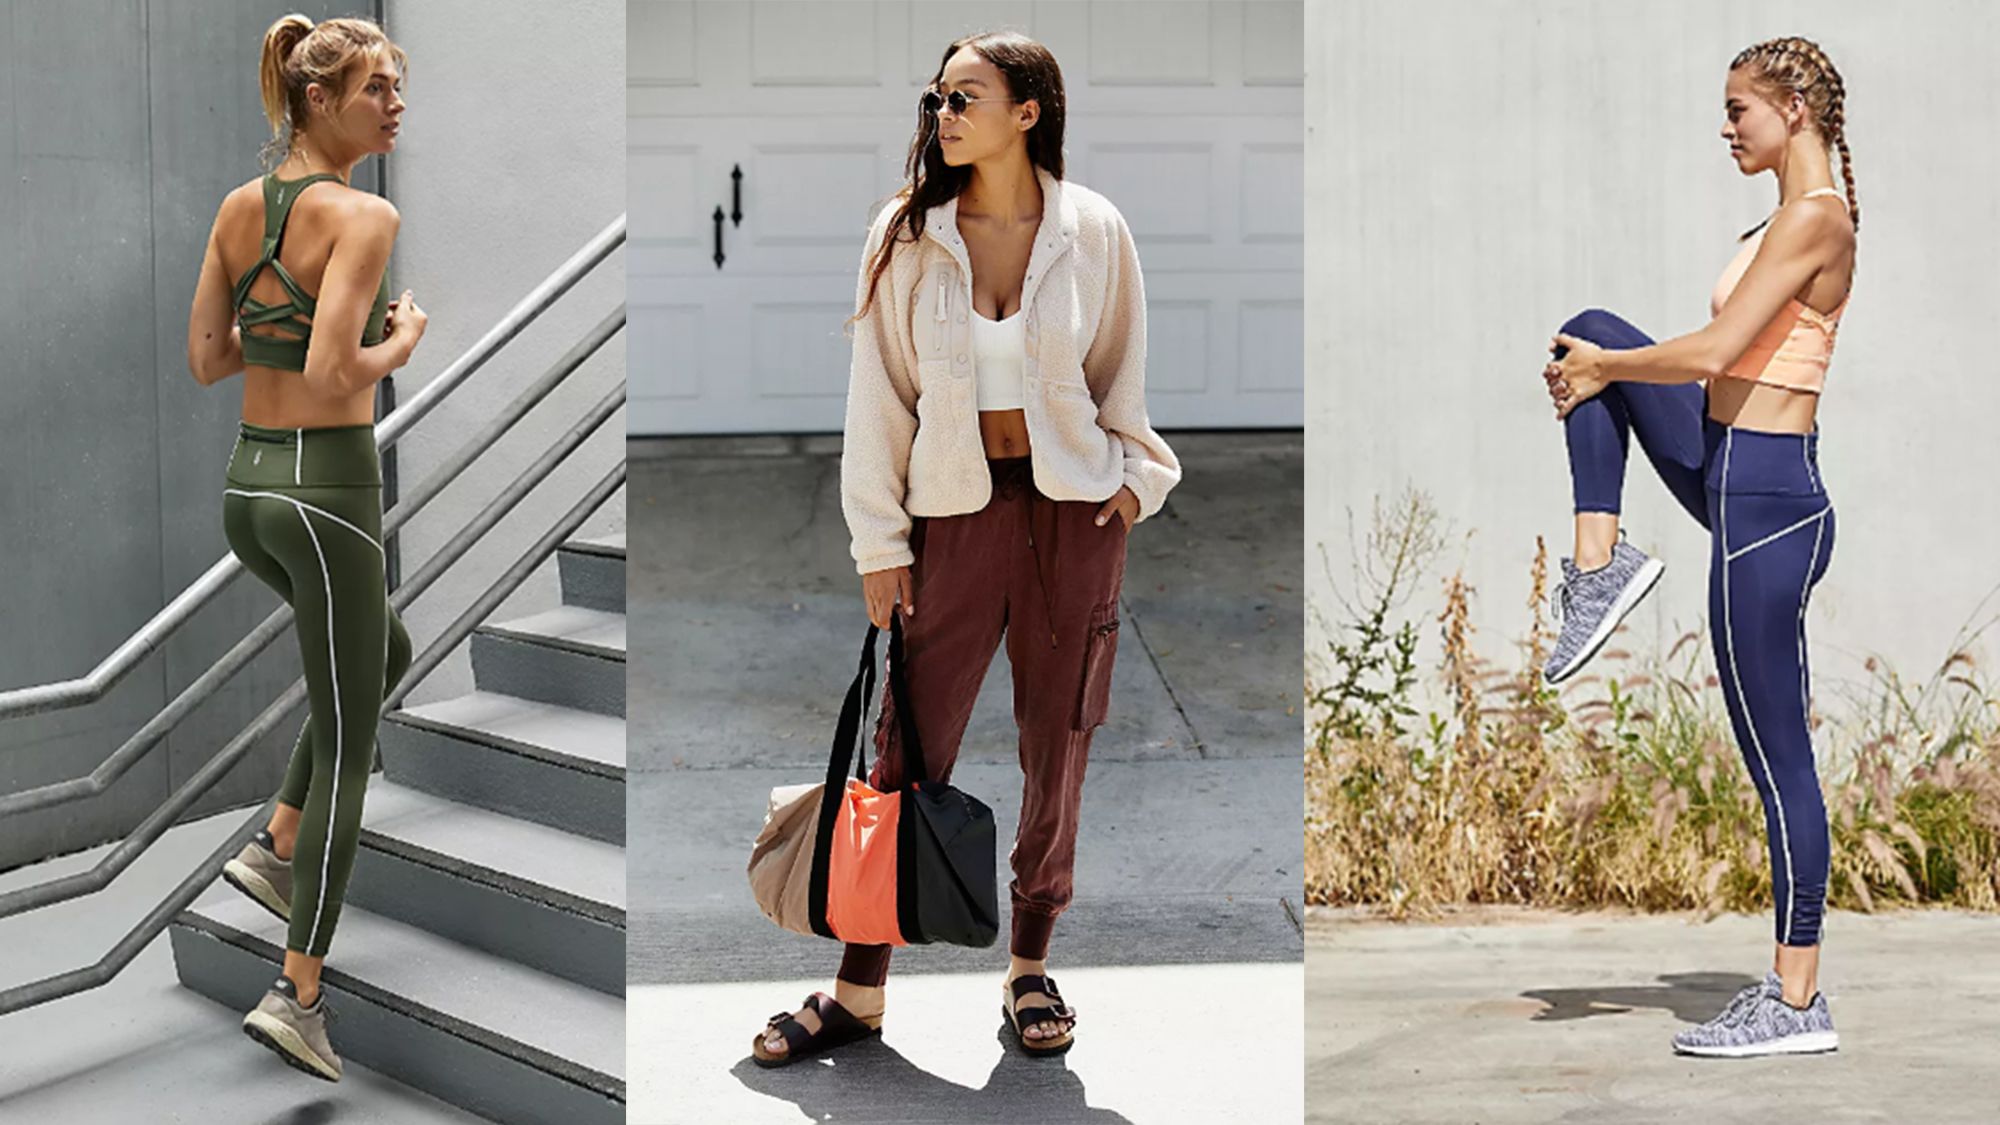 Yoga Pants vs. Leggings. Athleisure and activewear trends are